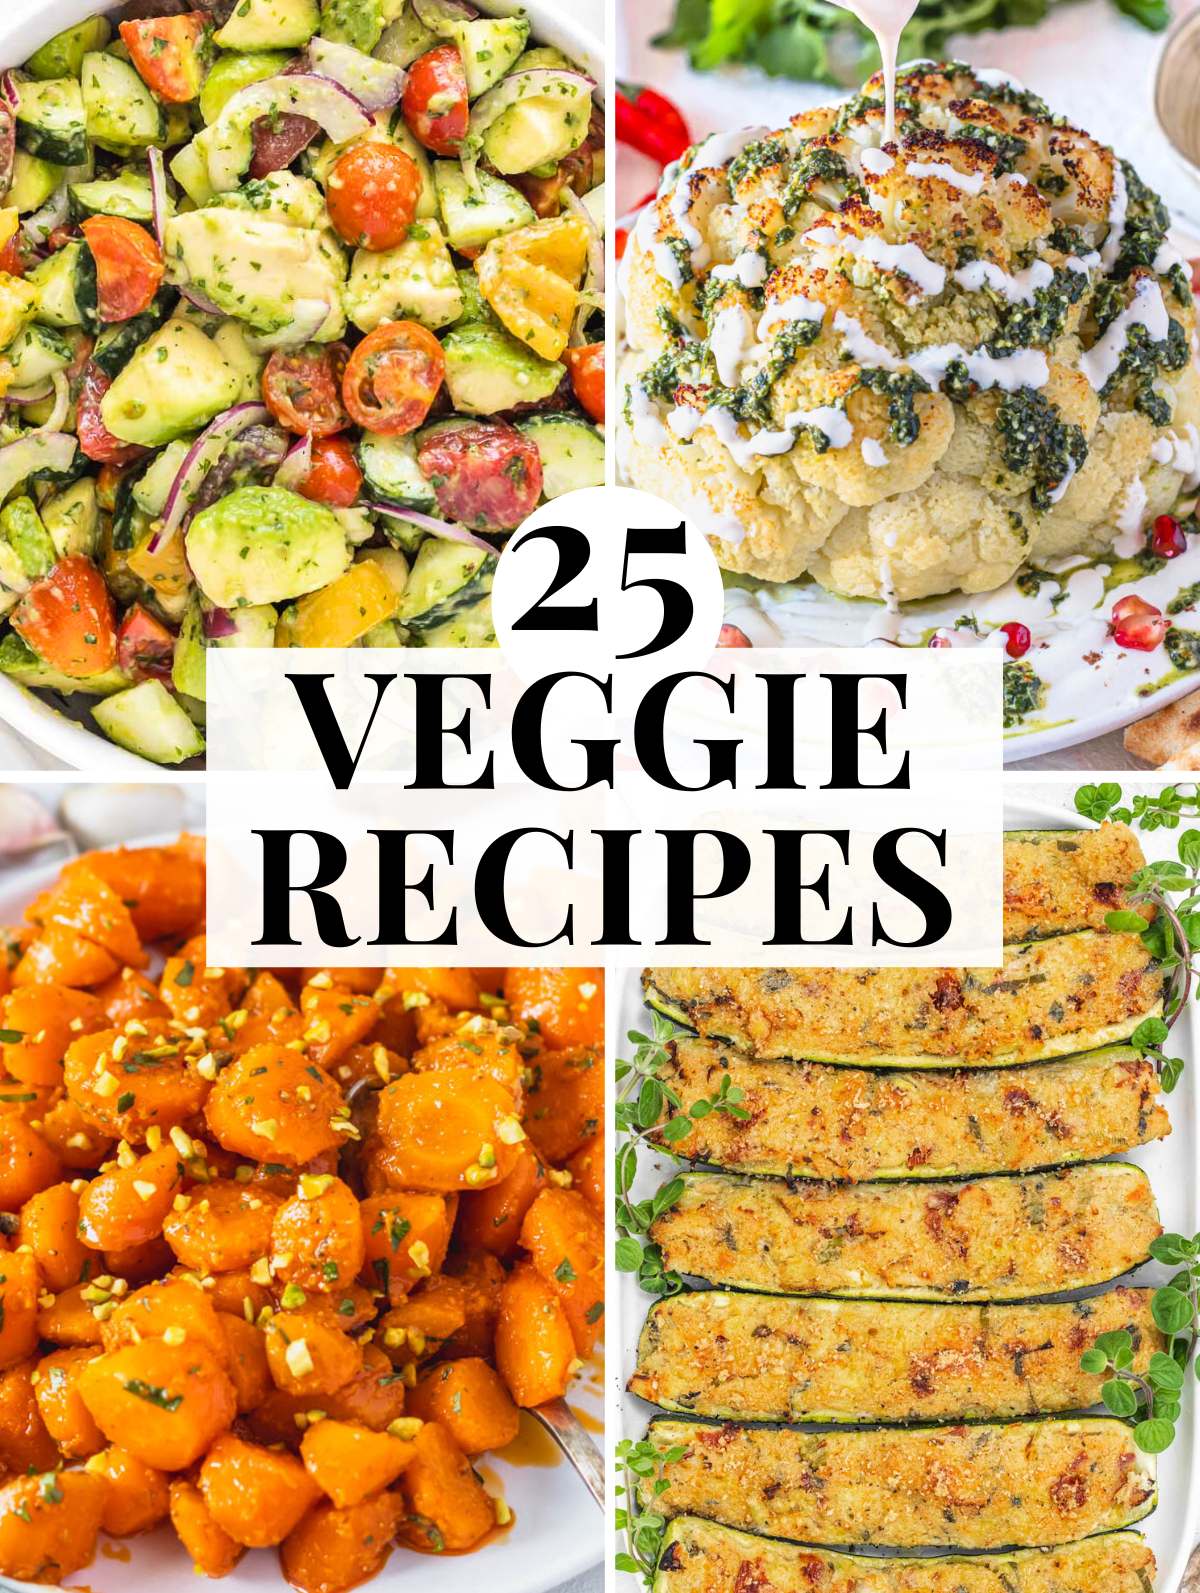 Easy vegetable recipes with roasted veggies, salads, and serving suggestions